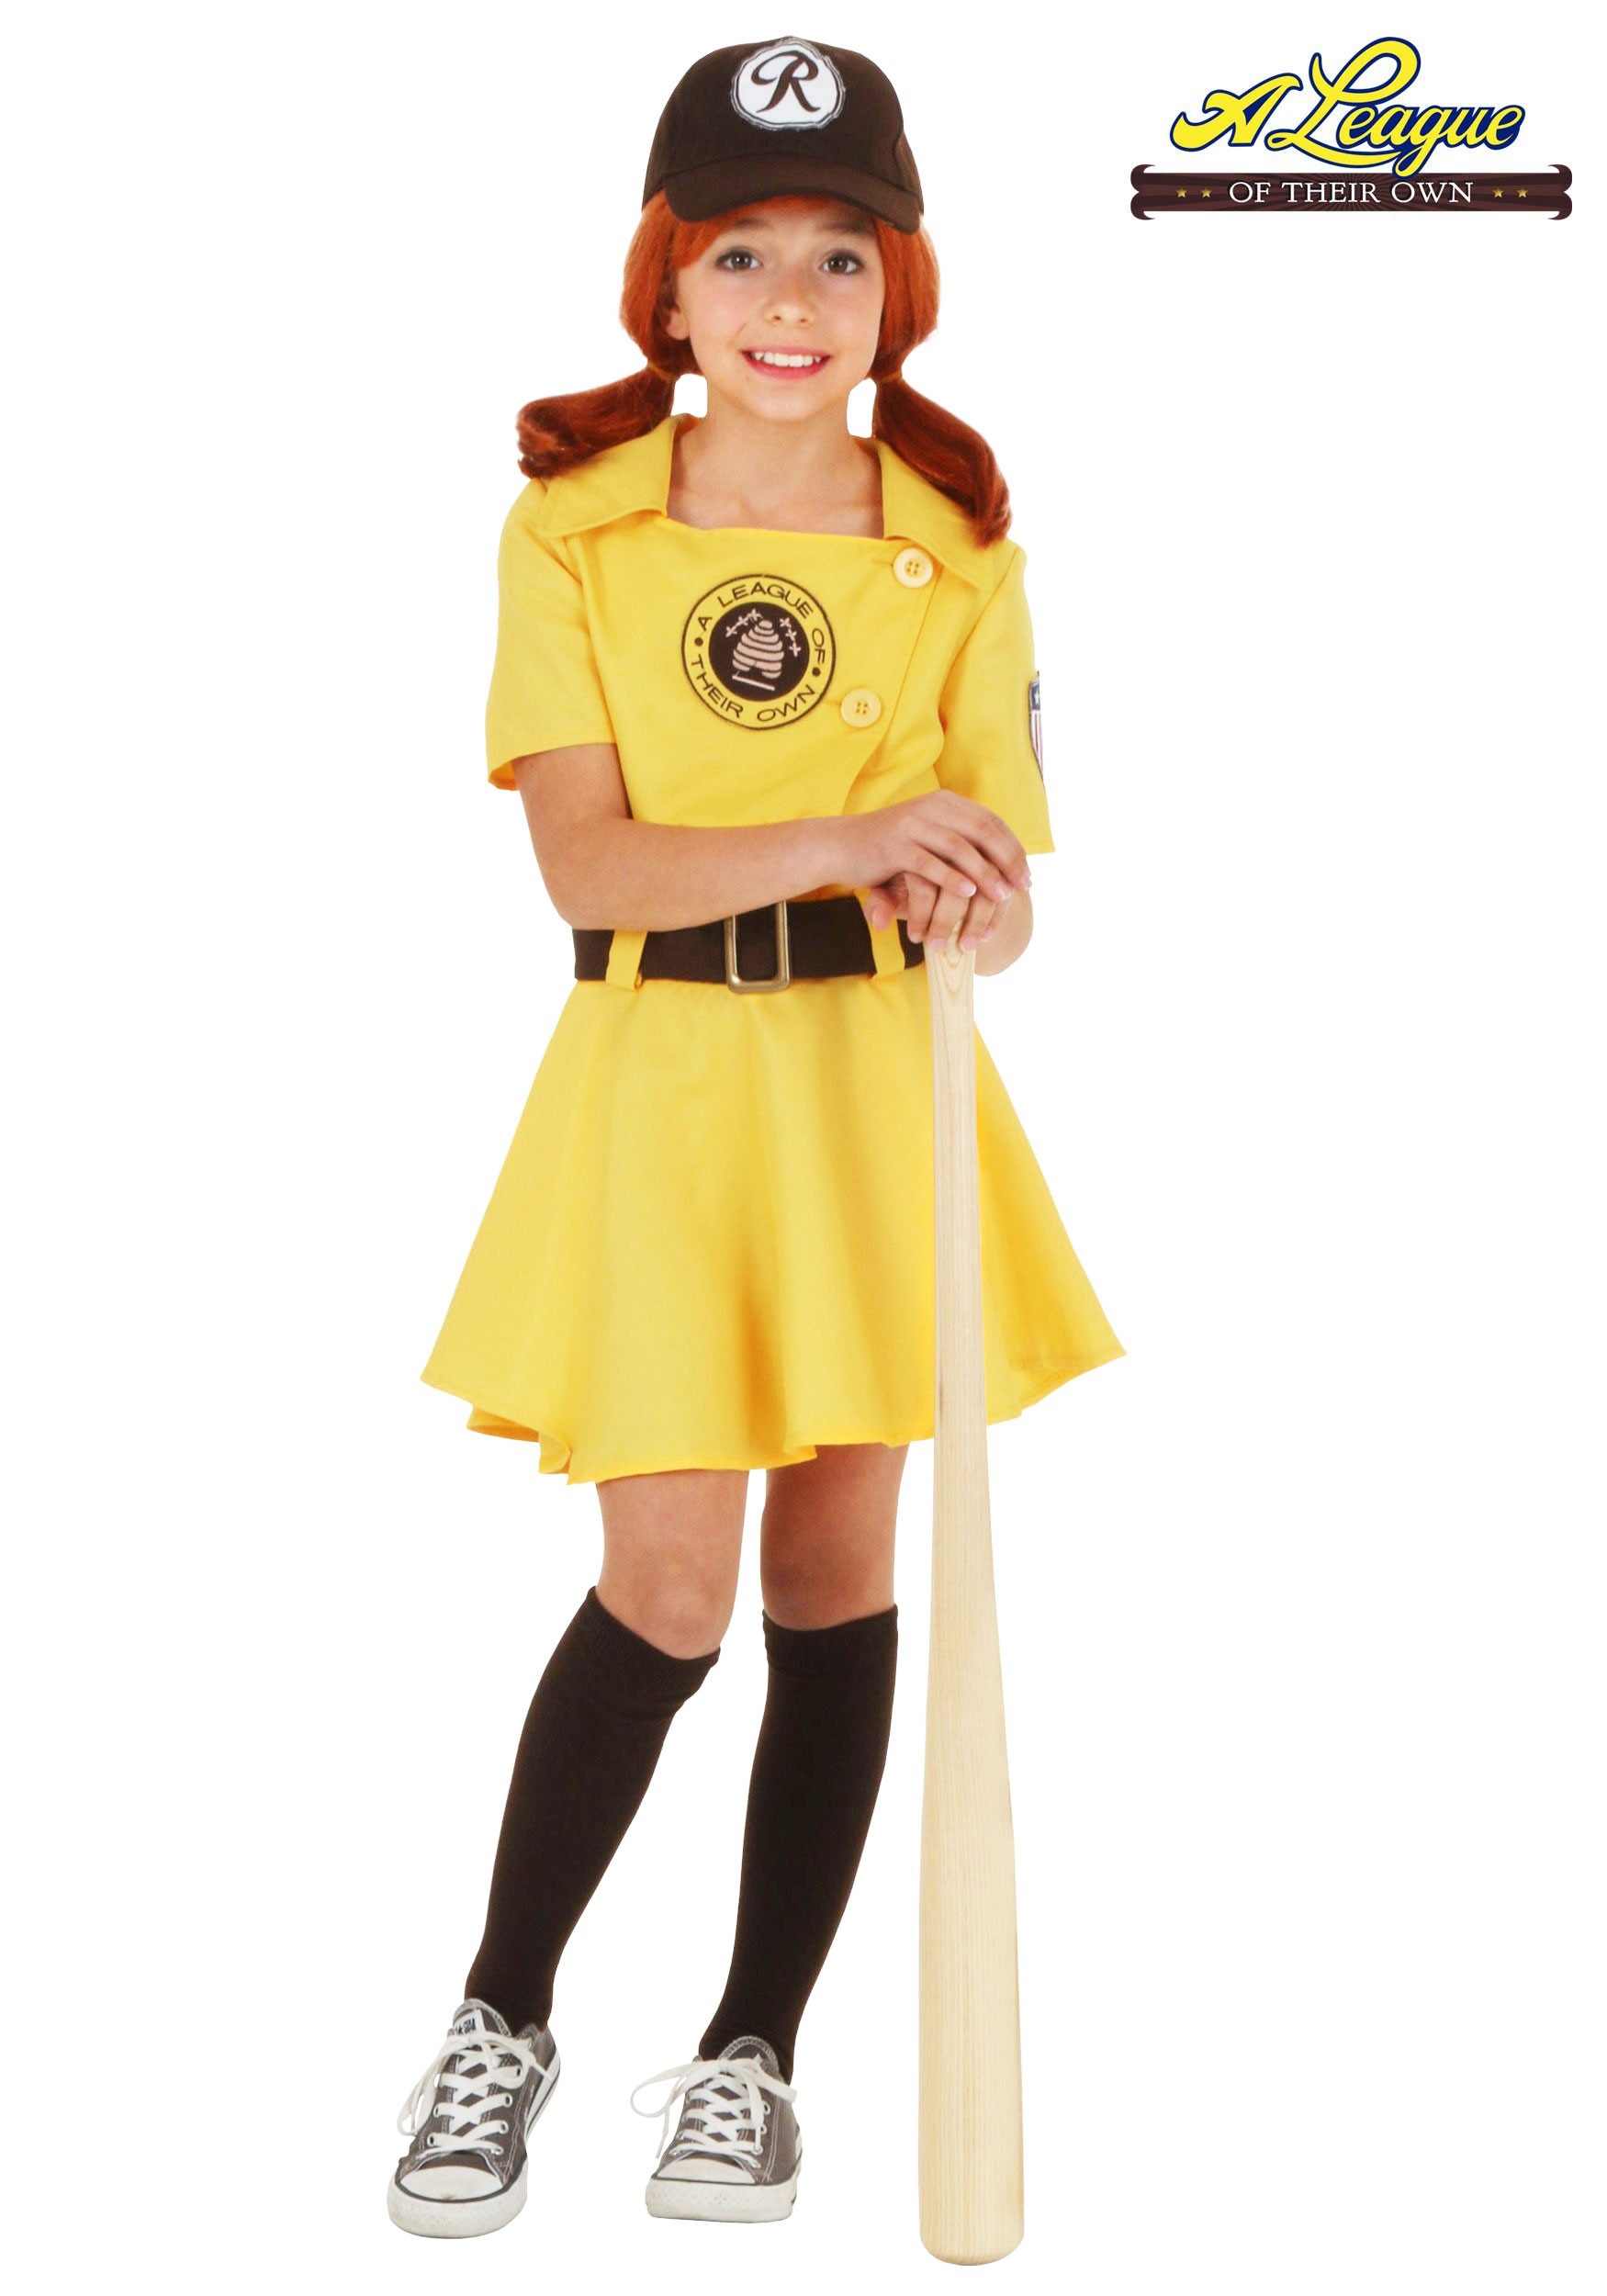 A League of Their Own Kit Girls Costume